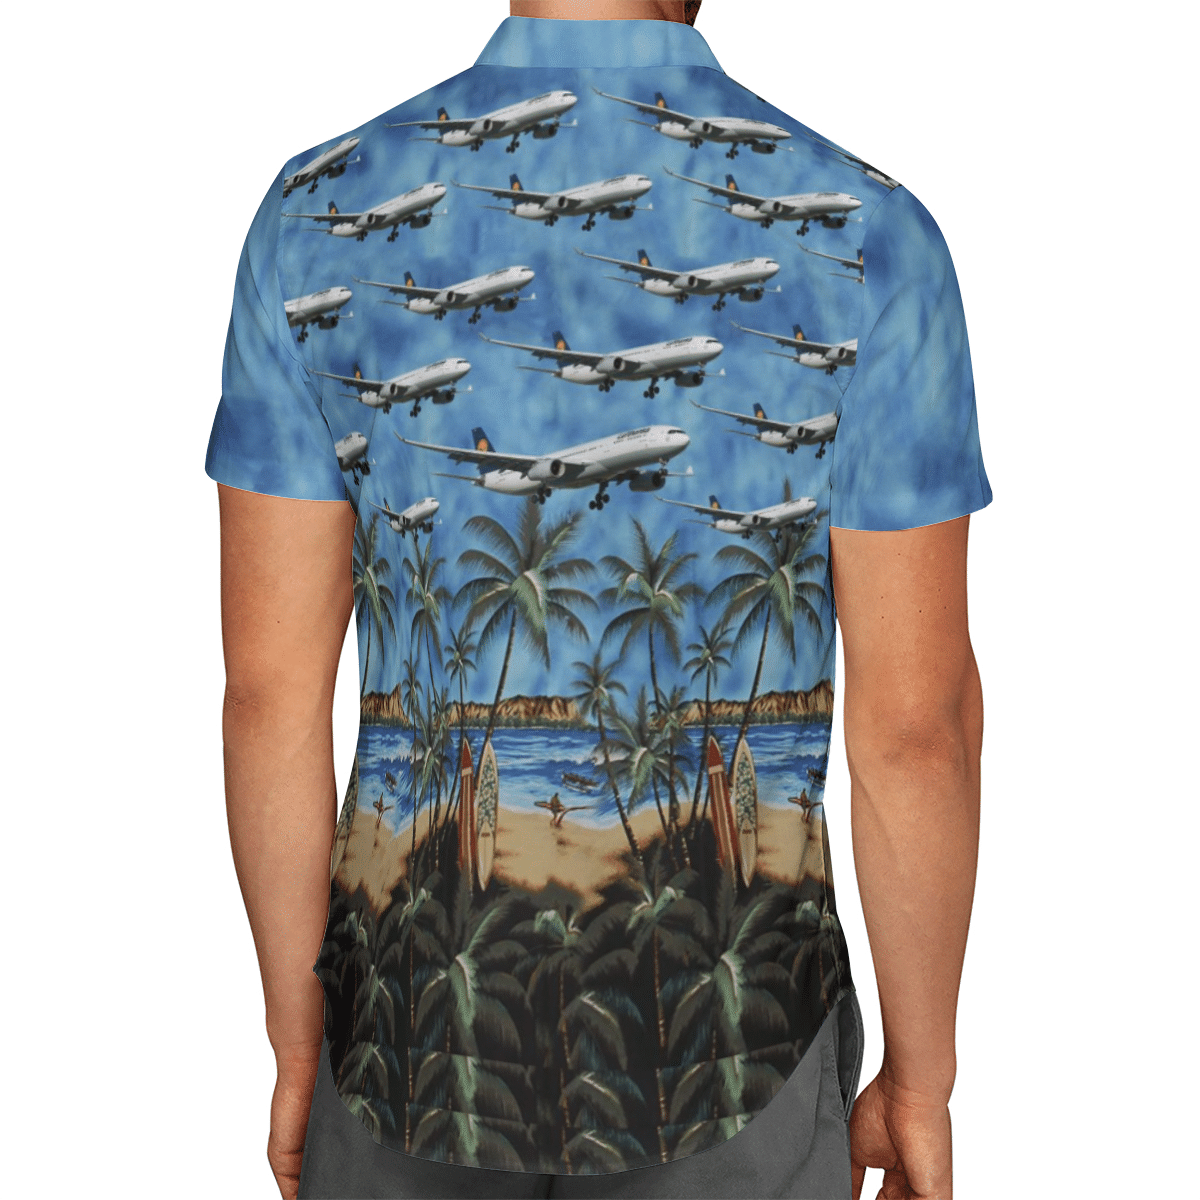 Going to the beach with a quality shirt 233